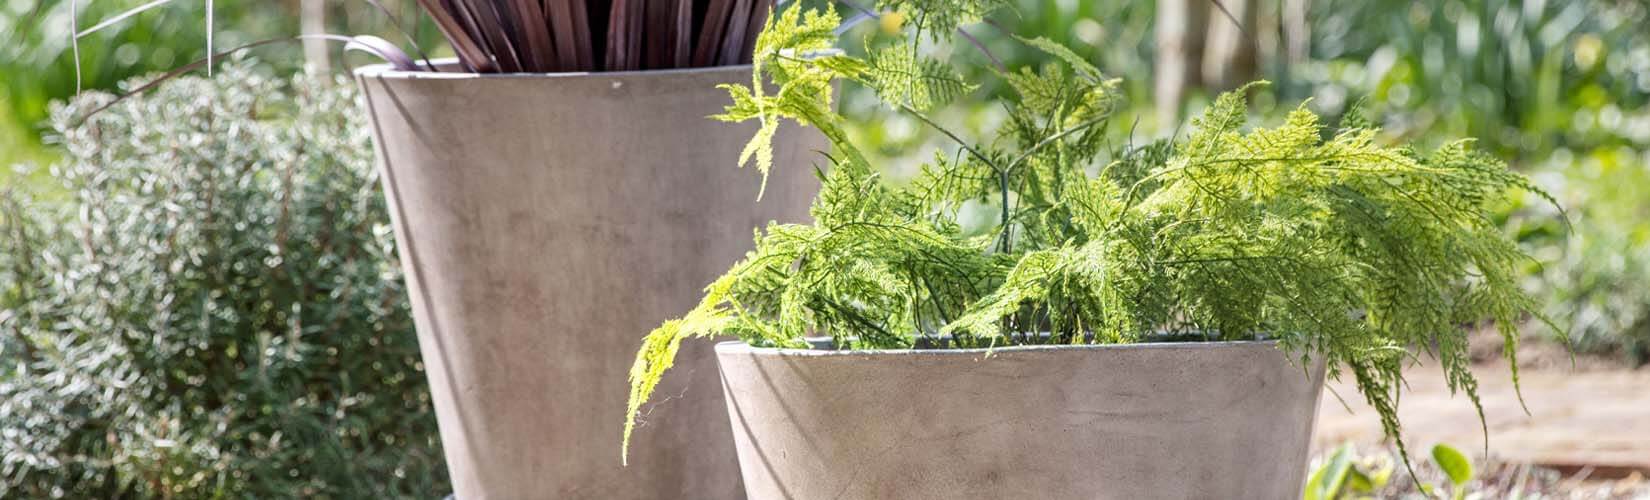 Choosing the Best Material for Your Plant Pots & Styles to Try in Your Home